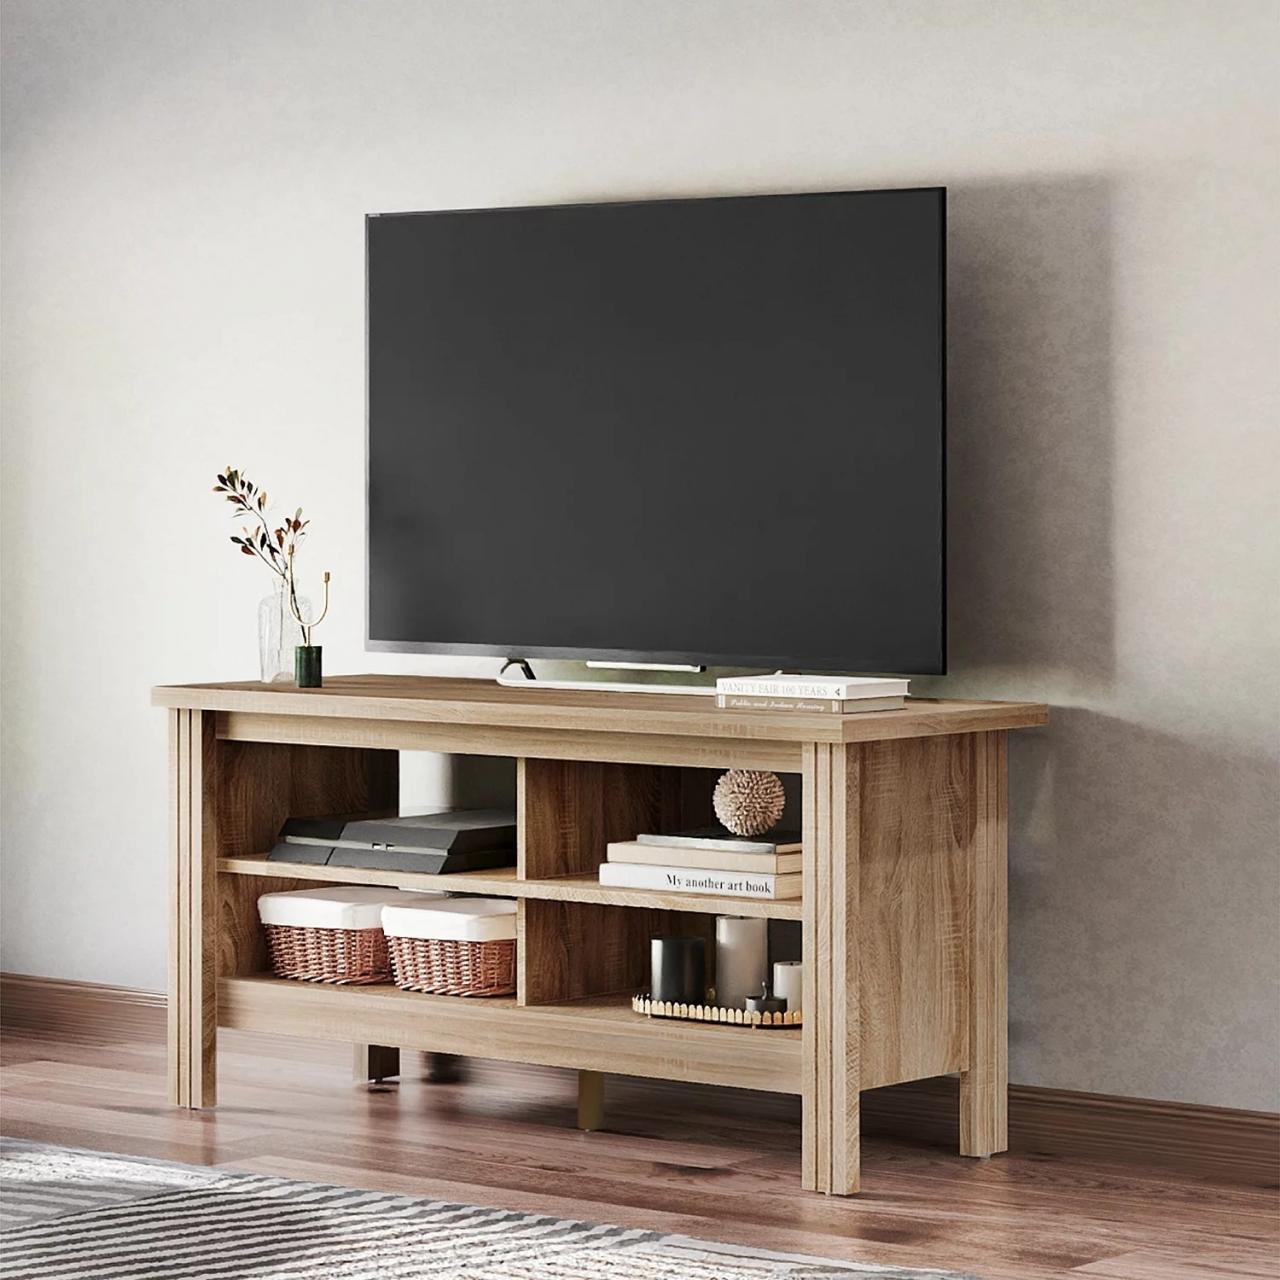 Farmhouse TV Stands for 55 inch TV Wood Media Console Storage